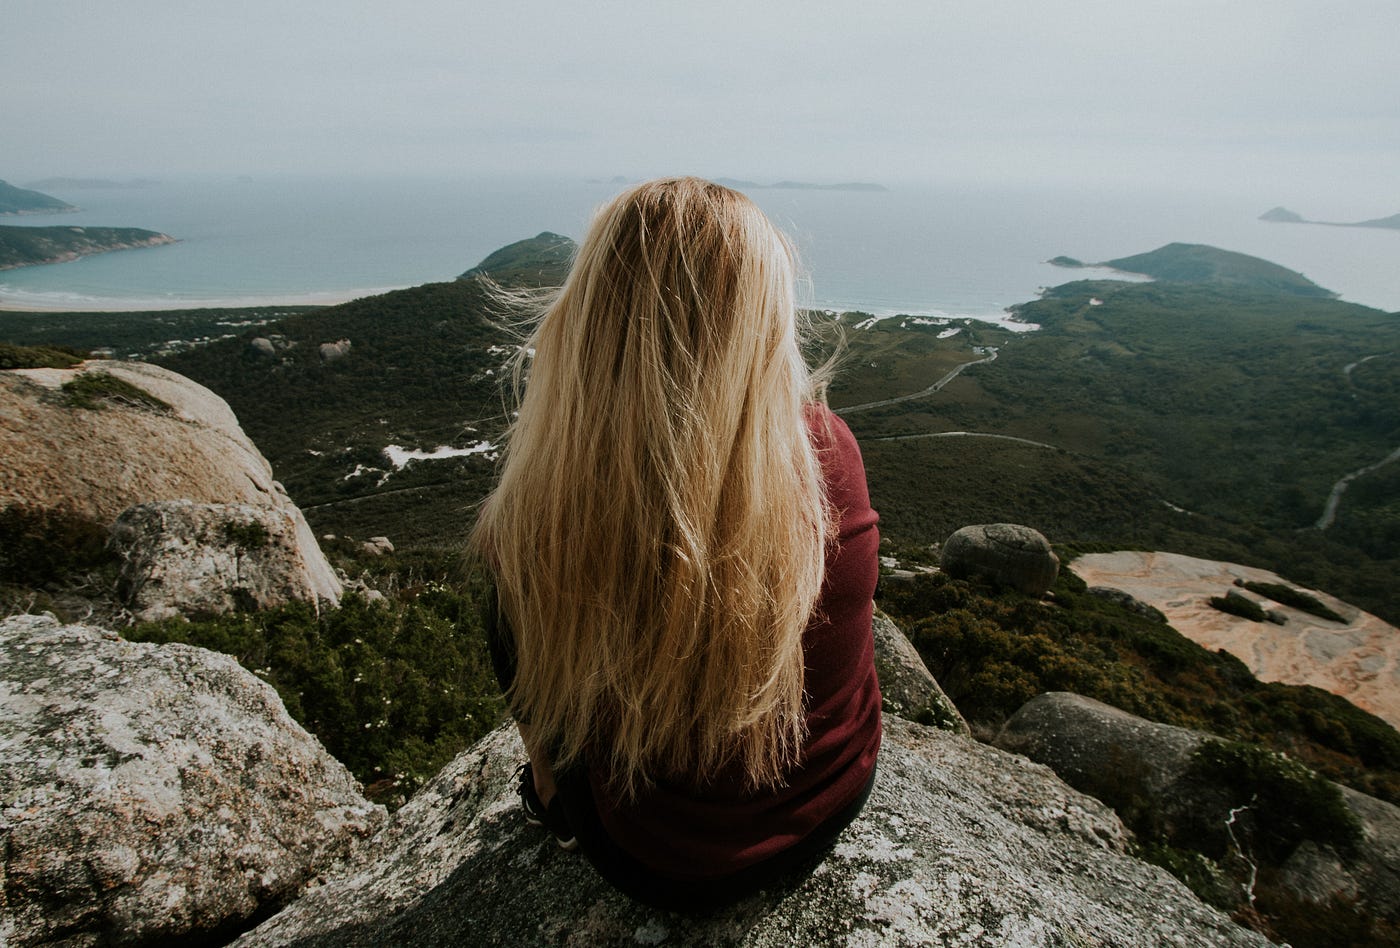 Girl sitting on a mountain overlooking a beautiful view.